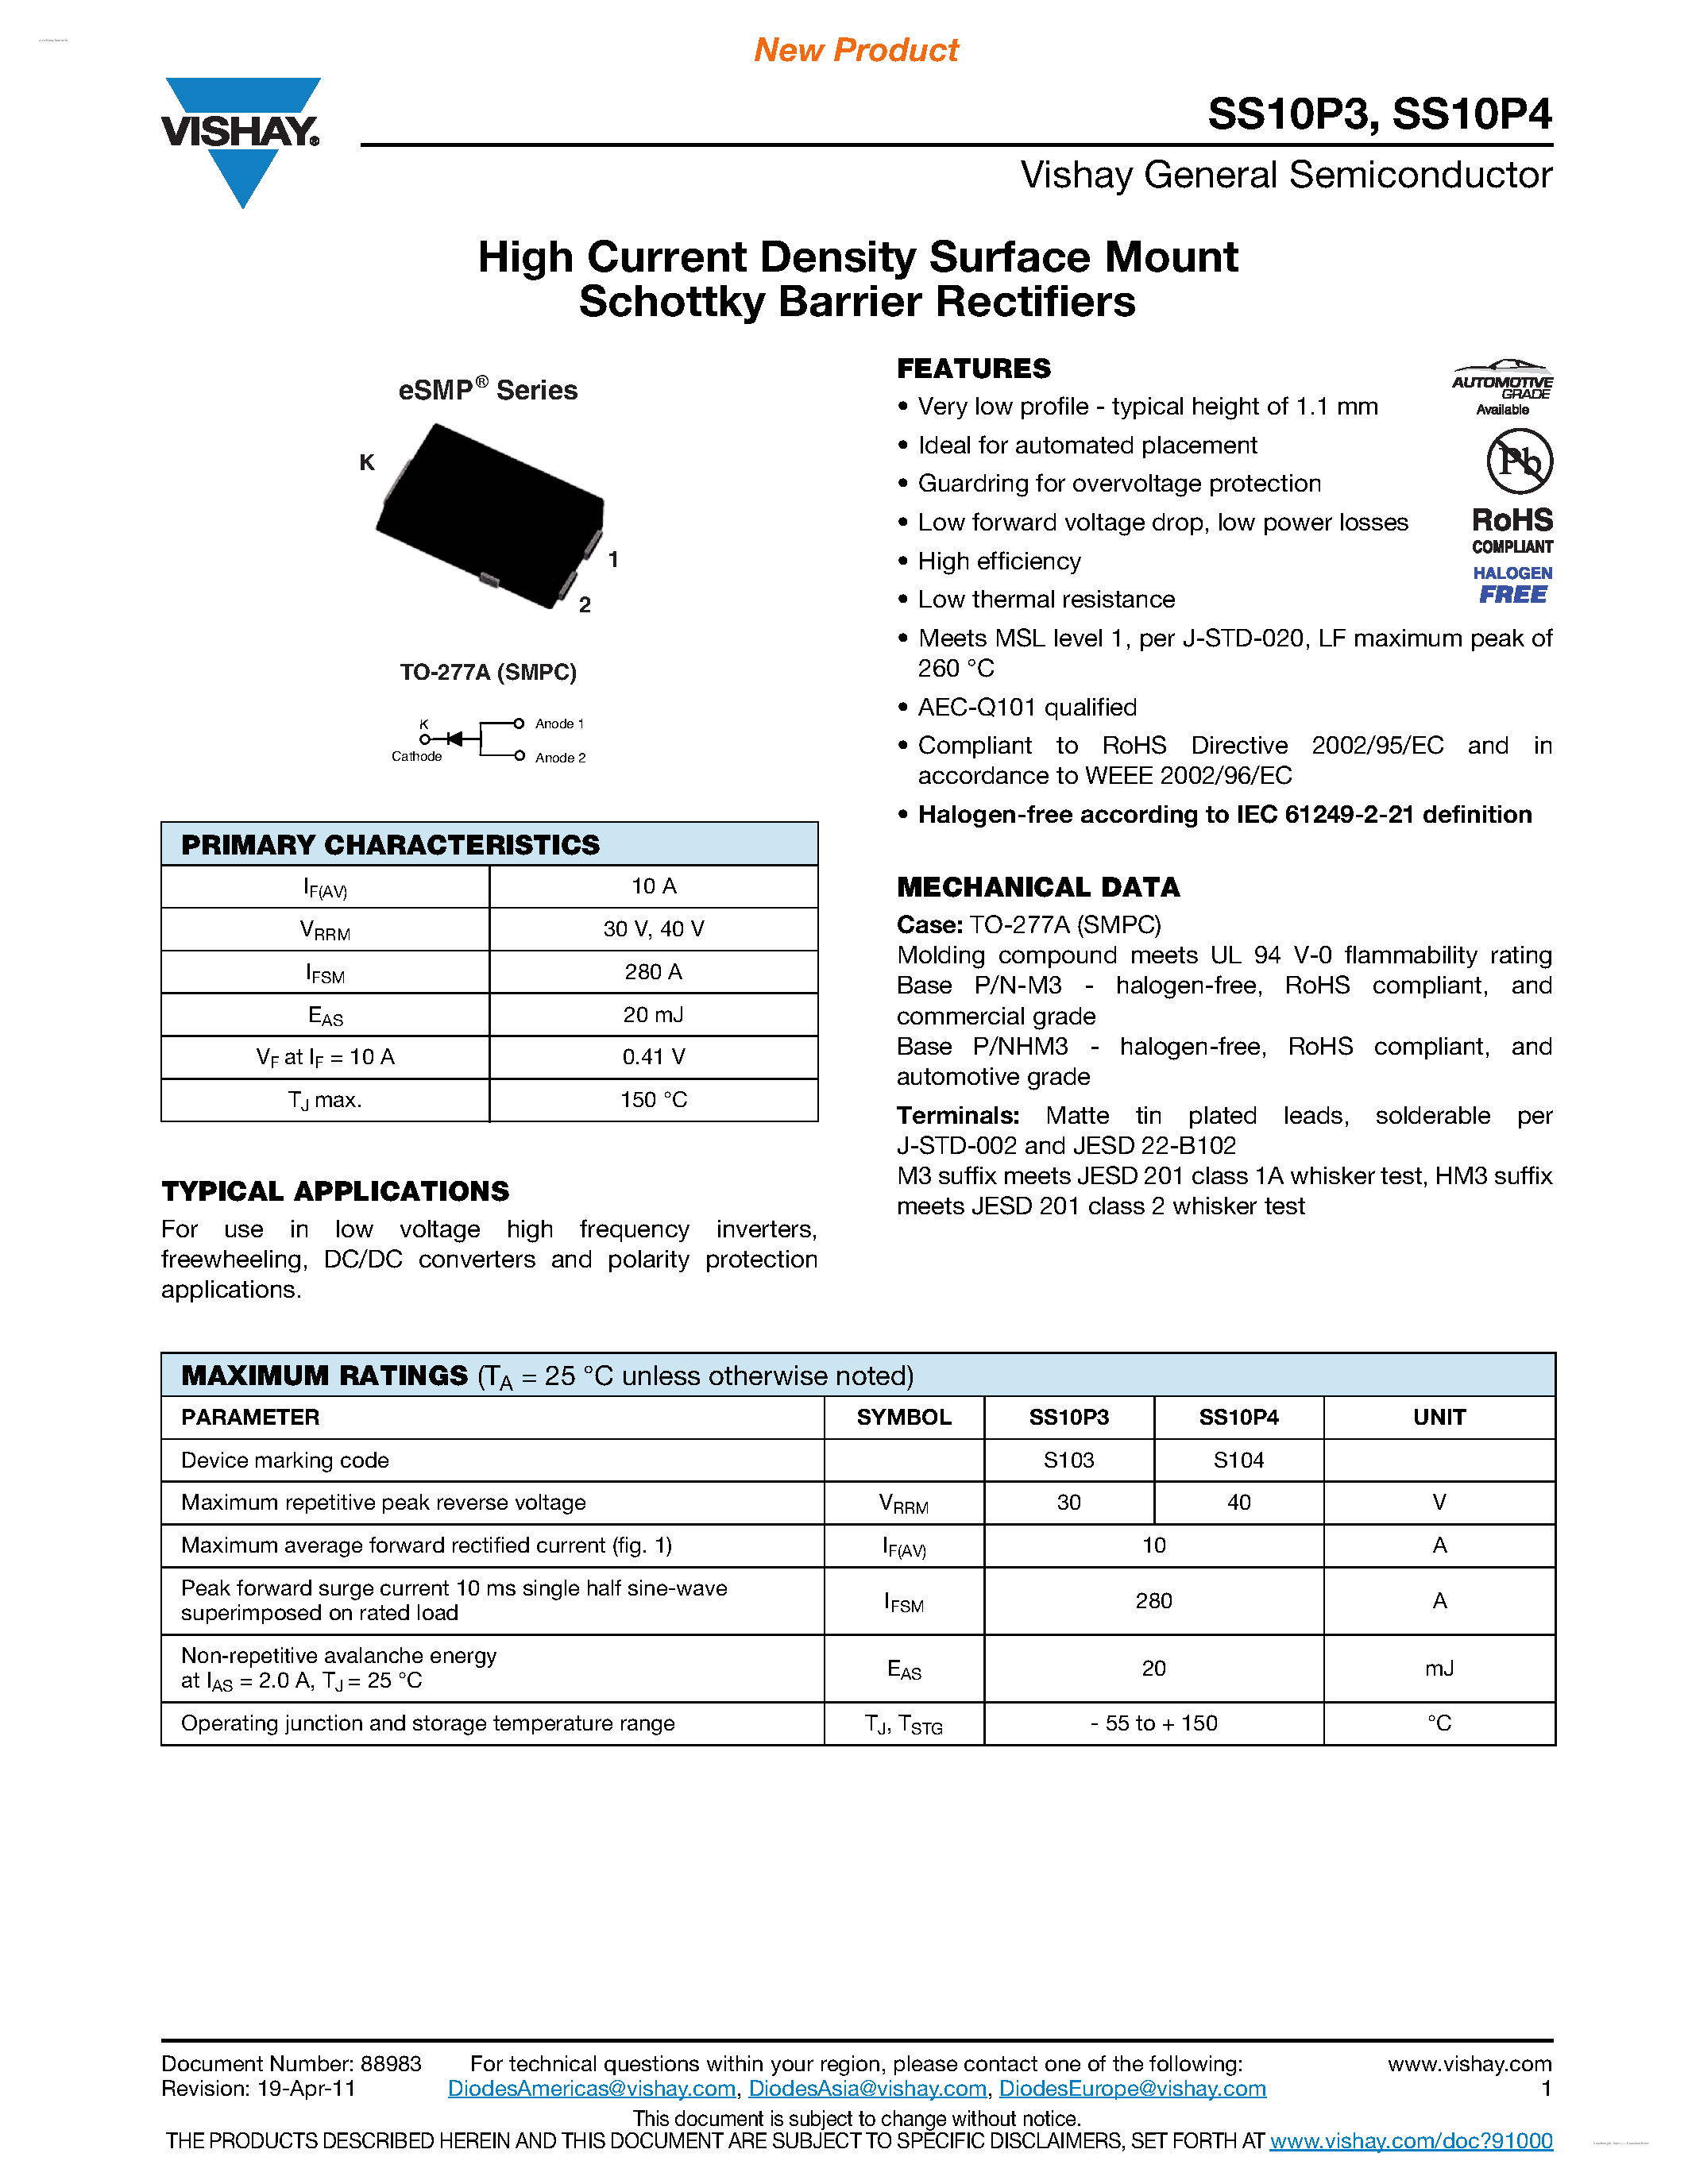 Даташит SS10P3-(SS10P3 / SS10P4) High Current Density Surface Mount Schottky Barrier Rectifiers страница 1